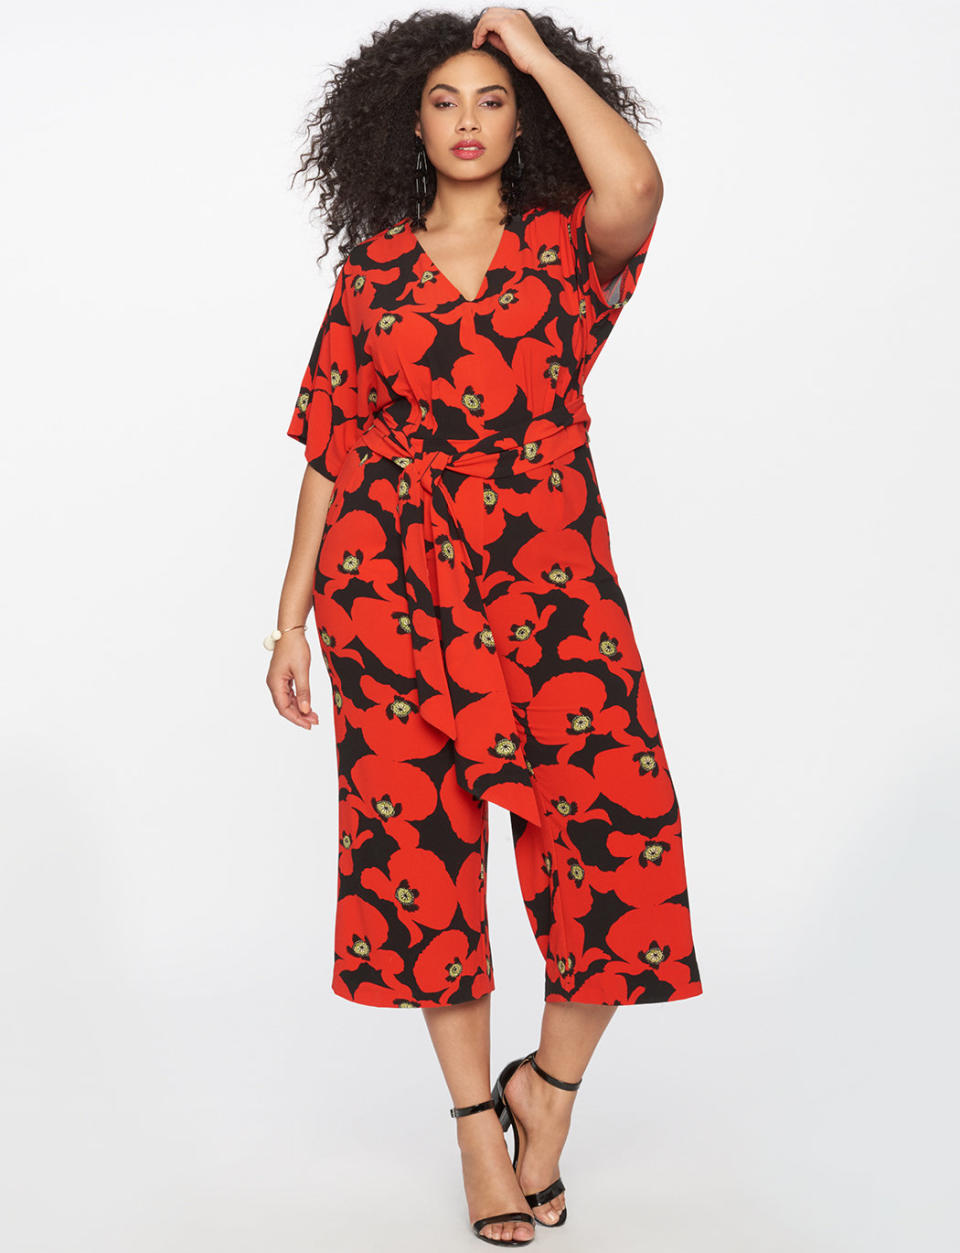 Get it on <a href="http://www.eloquii.com/wide-leg-printed-jumpsuit/1326006.html?cgid=jumpsuits&amp;start=1&amp;dwvar_1326006_colorCode=16" target="_blank">Eloquii for $140</a>.